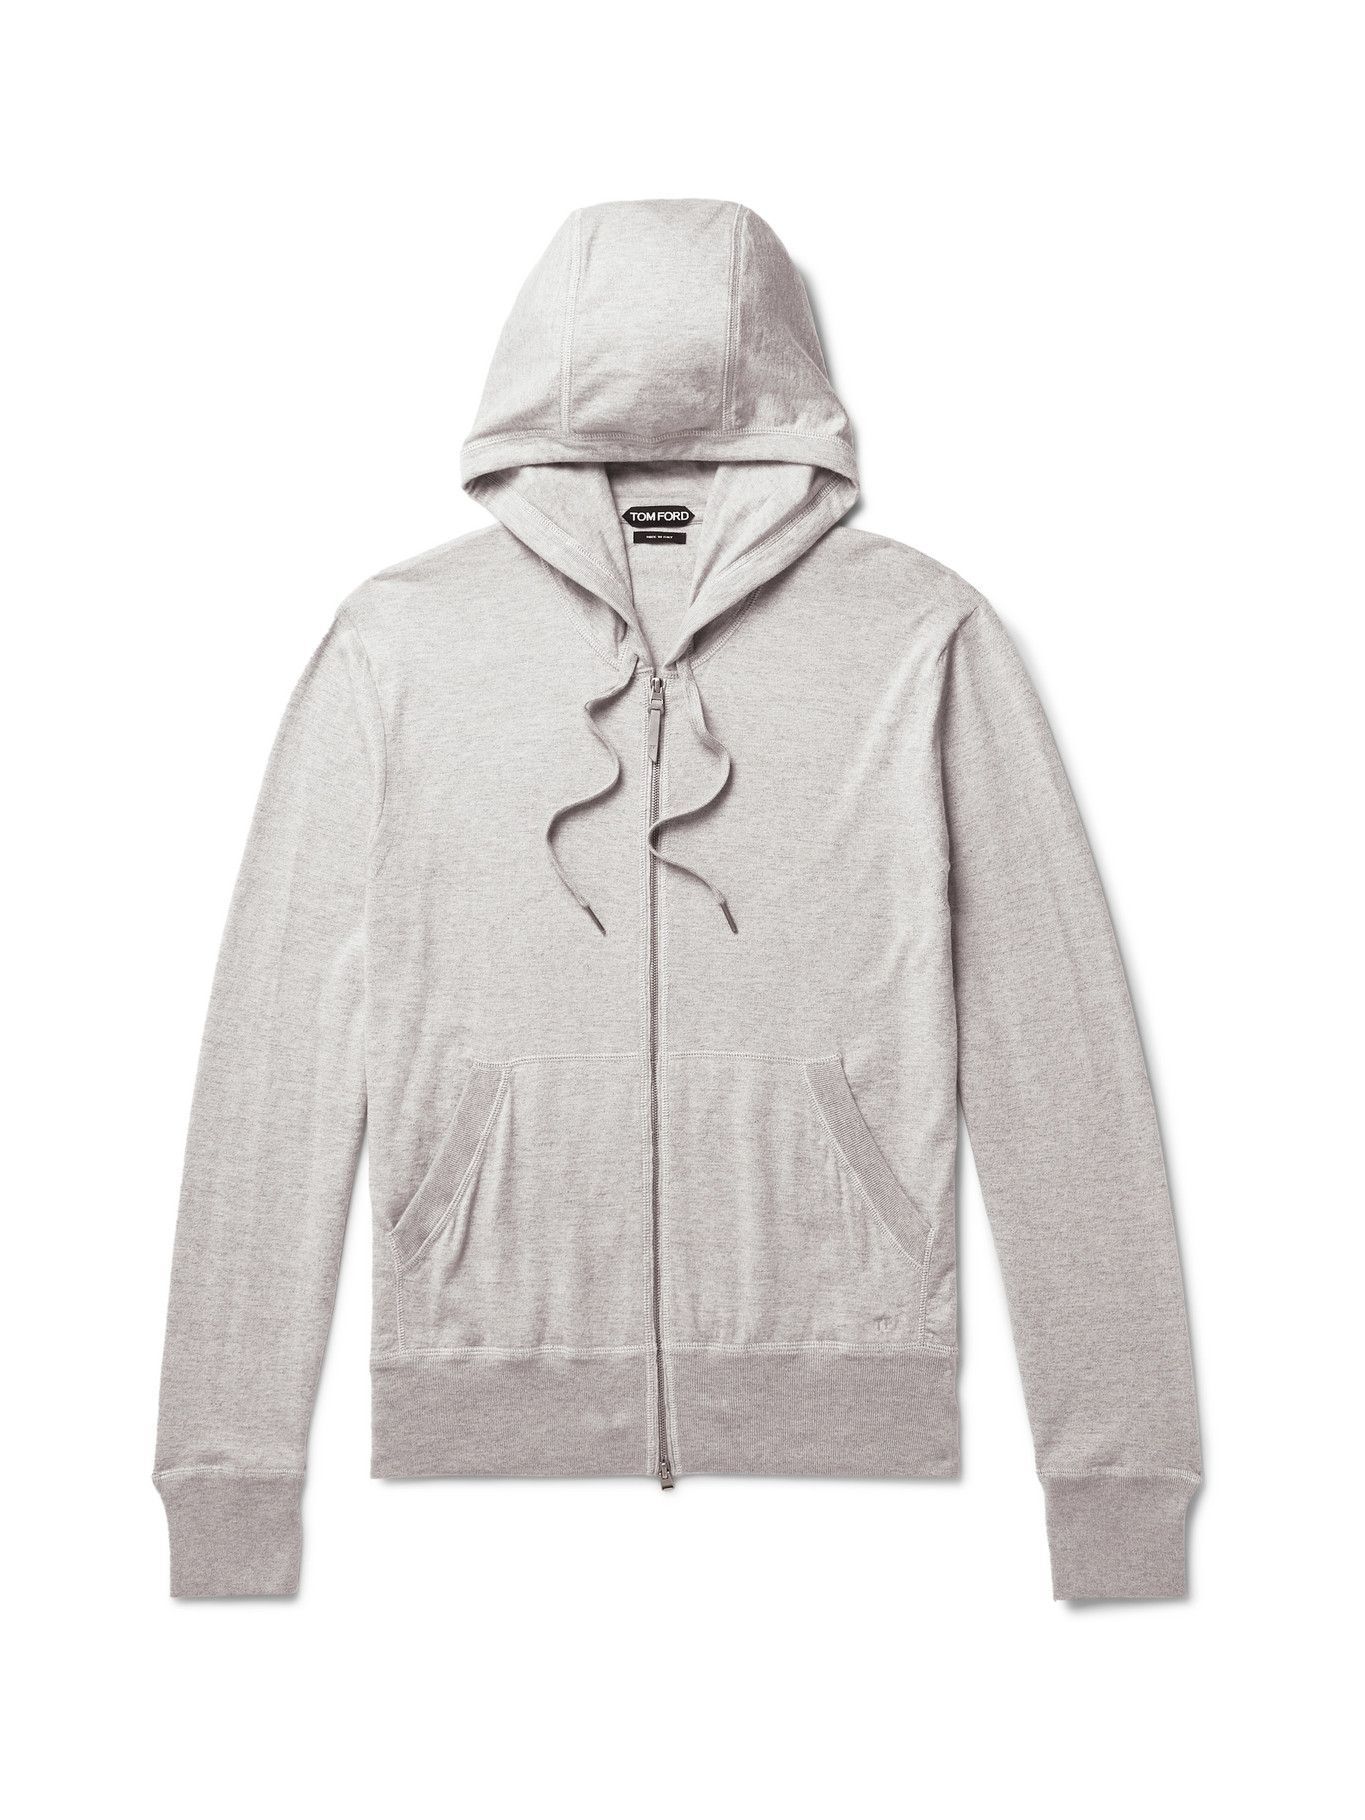 TOM FORD - Mélange Cotton, Silk and Cashmere-Blend Zip-Up Hoodie - Gray TOM  FORD